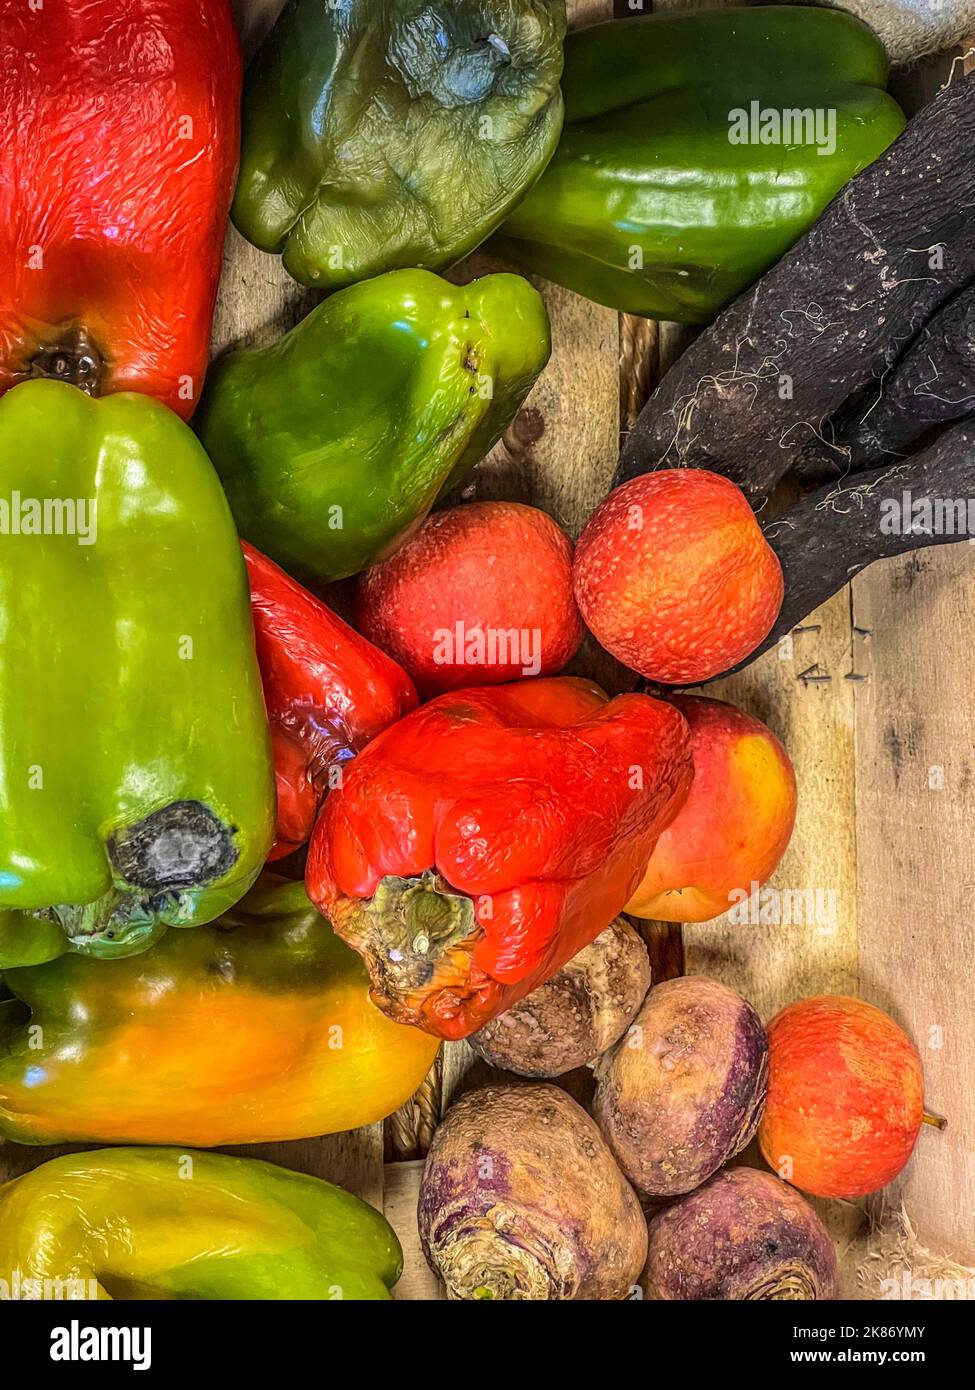 loose sale, rotten fruits and vegetables. Over the expiry date Stock Photo